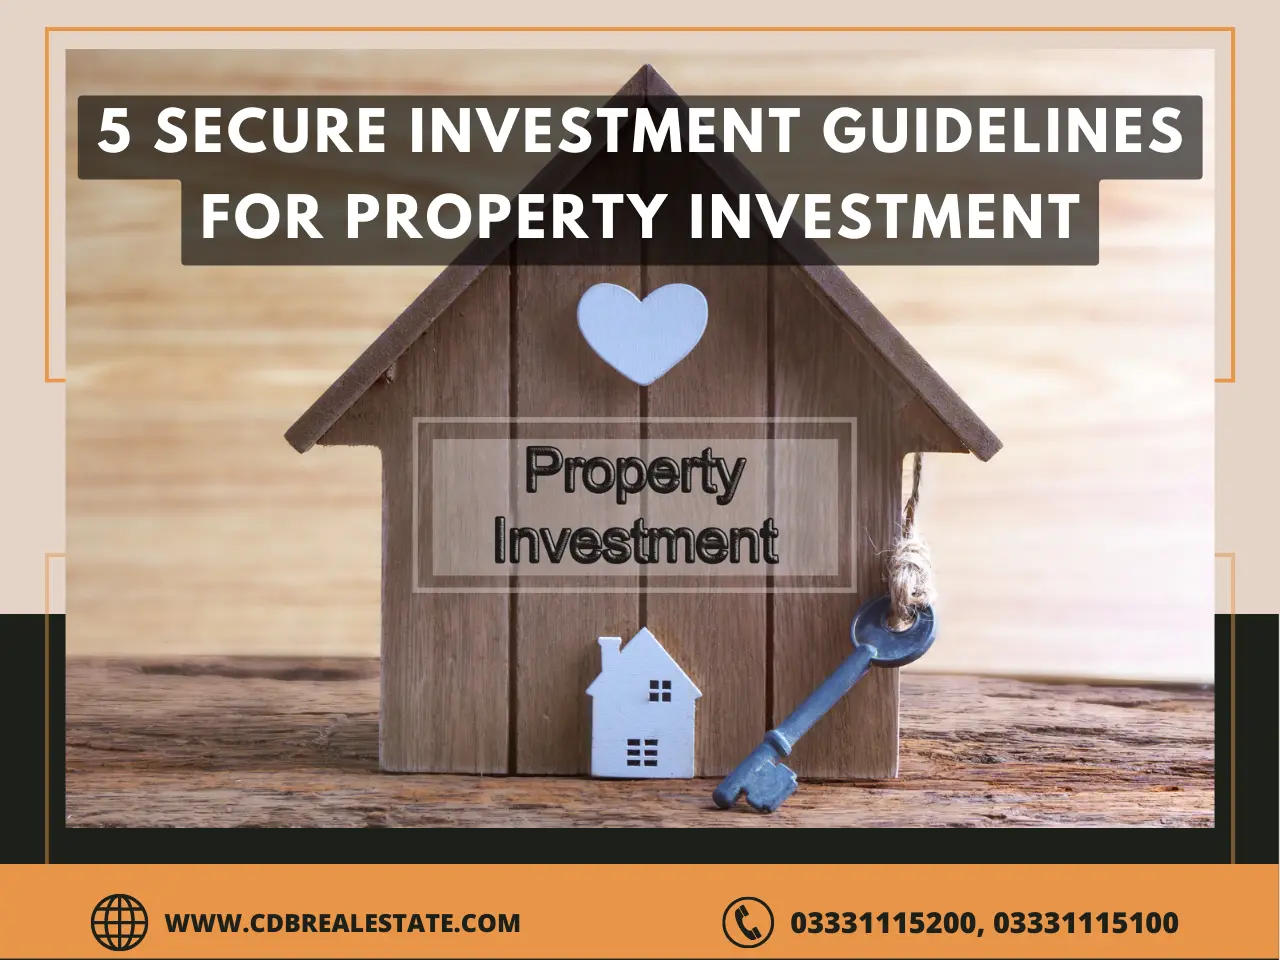 5 Secure Investment Guidelines for Property Investment